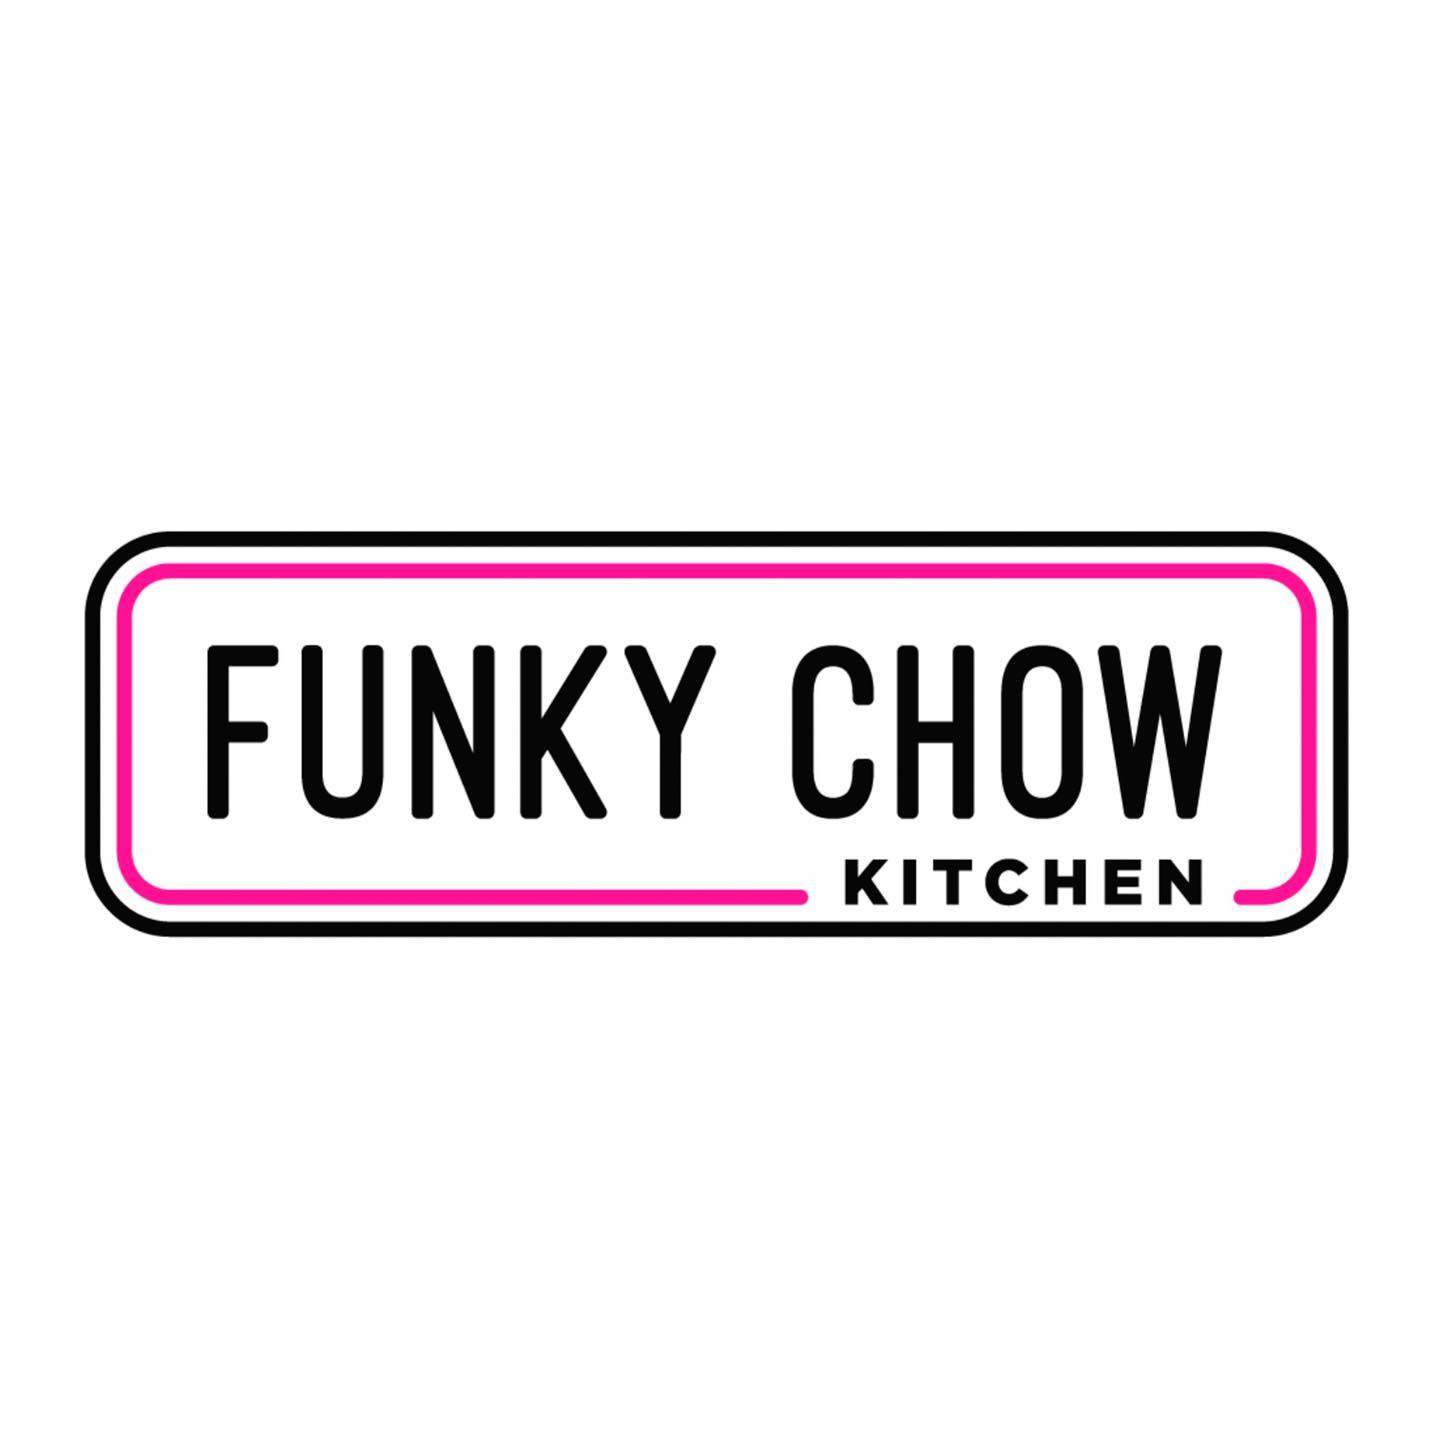 Funky Chow Kitchen